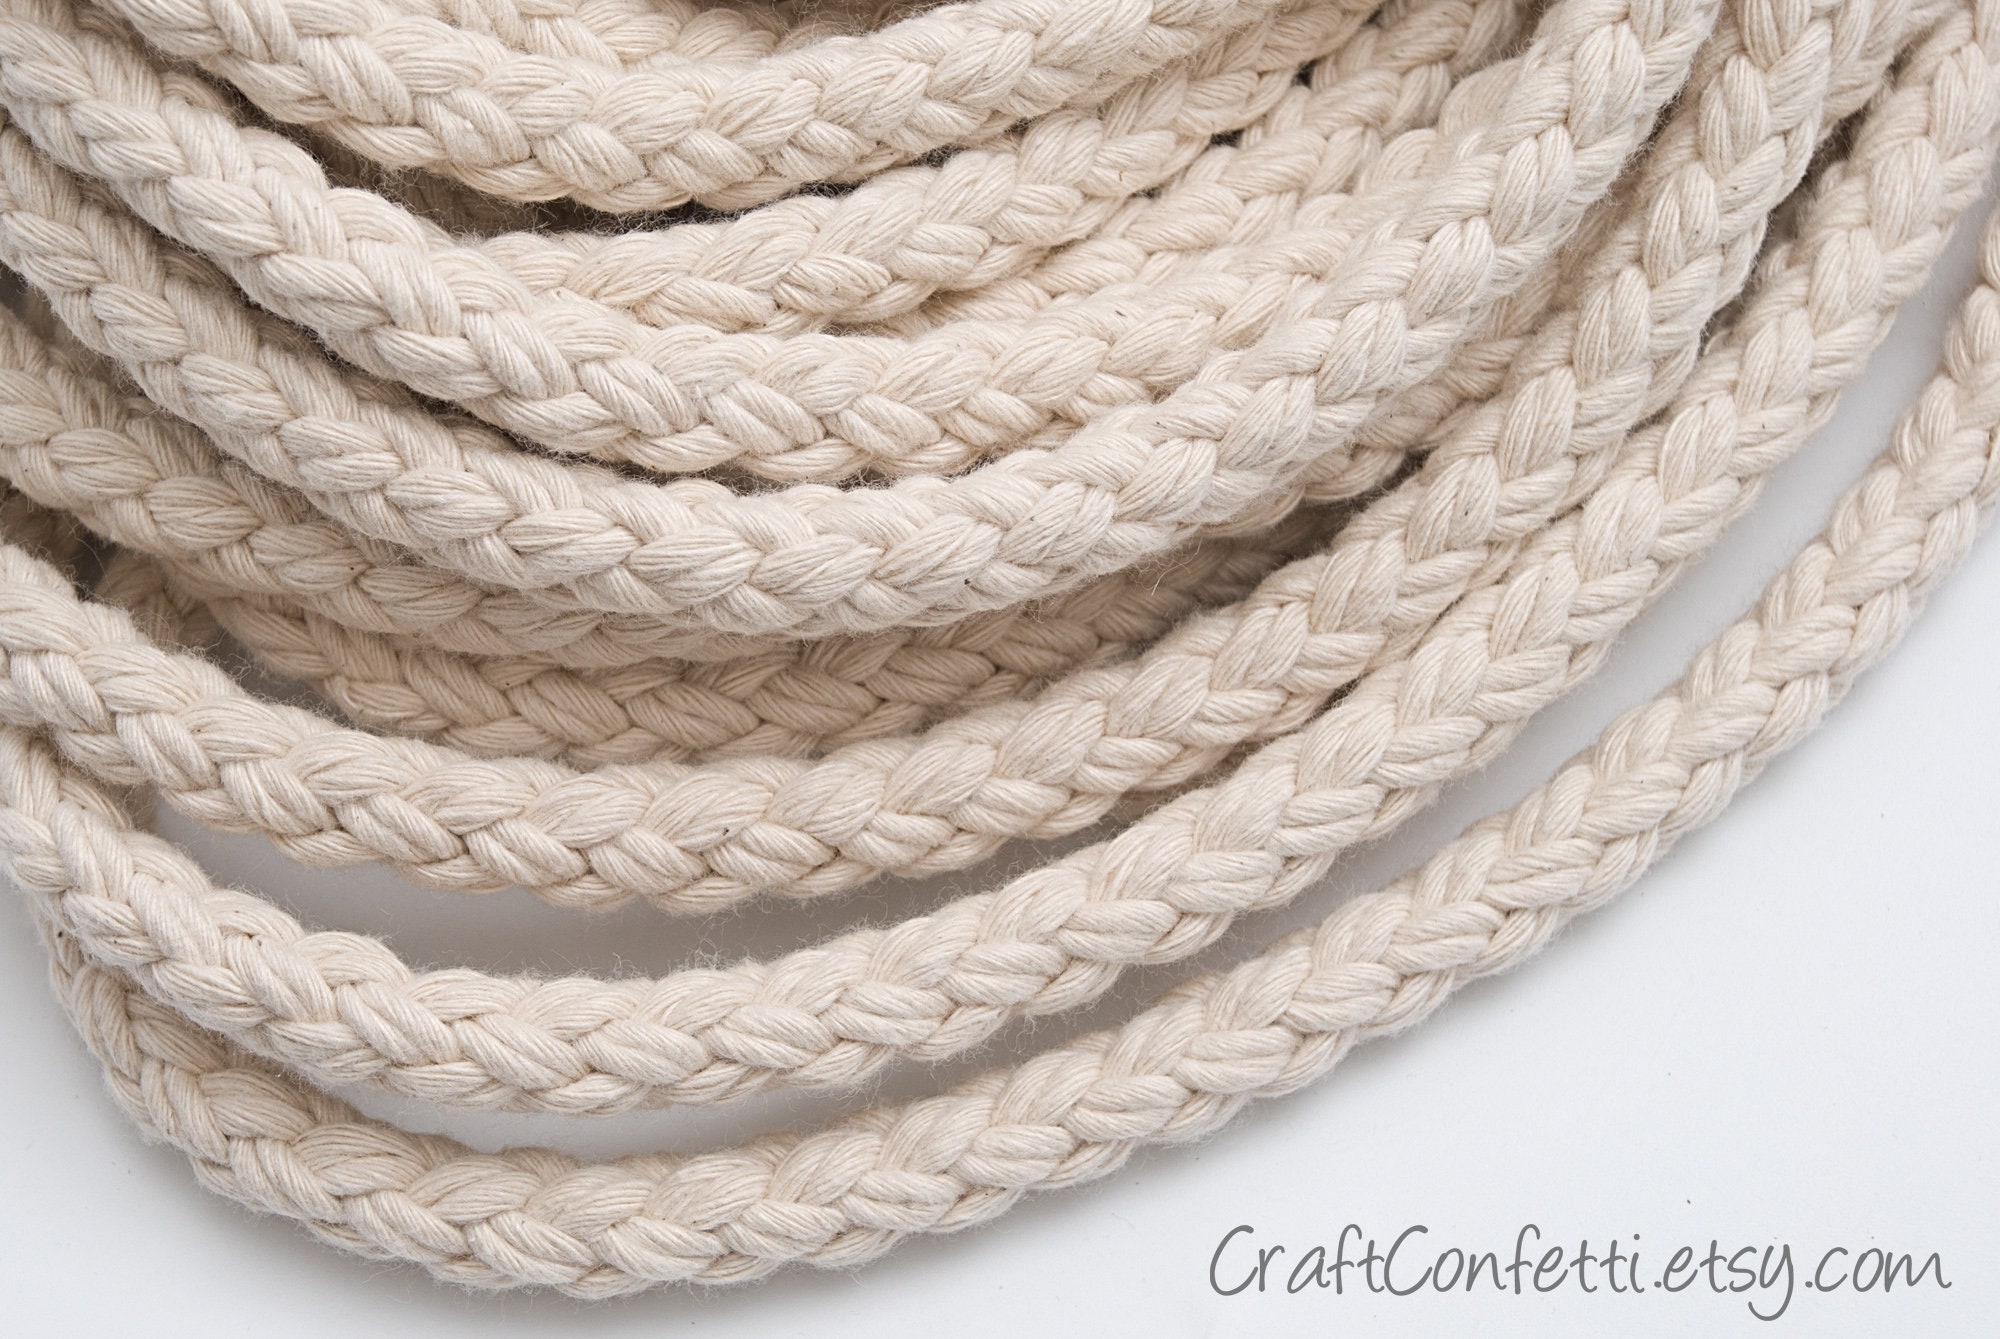 KnottyCord  Cotton Tight Rope Braided Cord (25m, 8mm) Twine